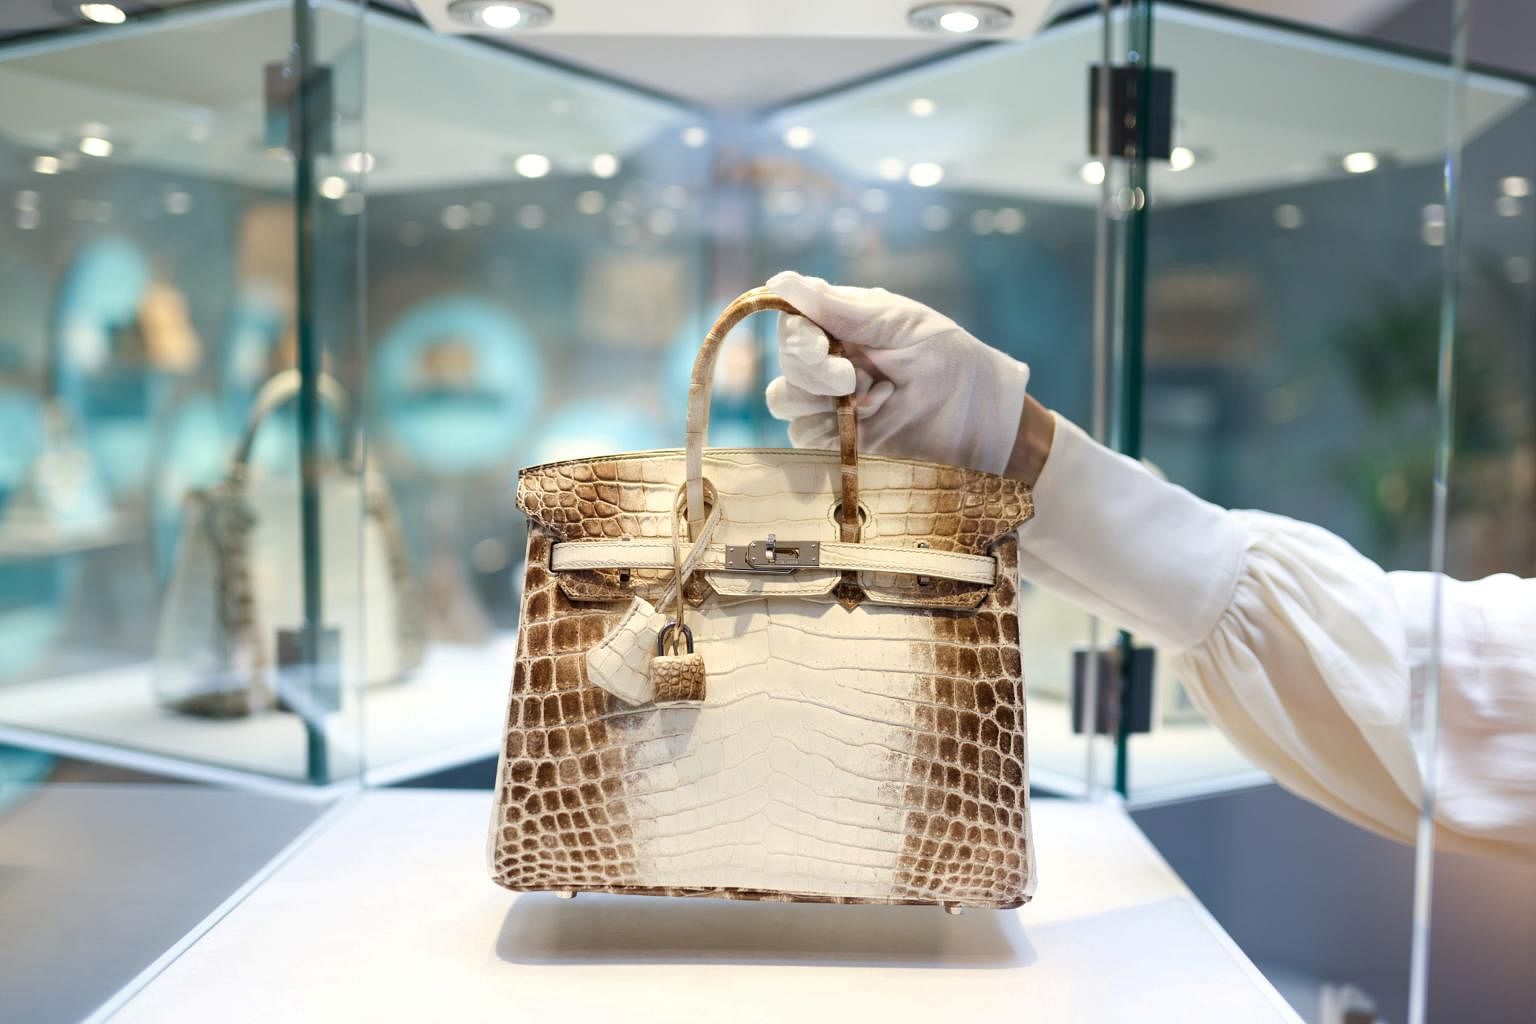 Hermès Reports Soaring Sales Of Birkins As Stand-Out Brand Amid